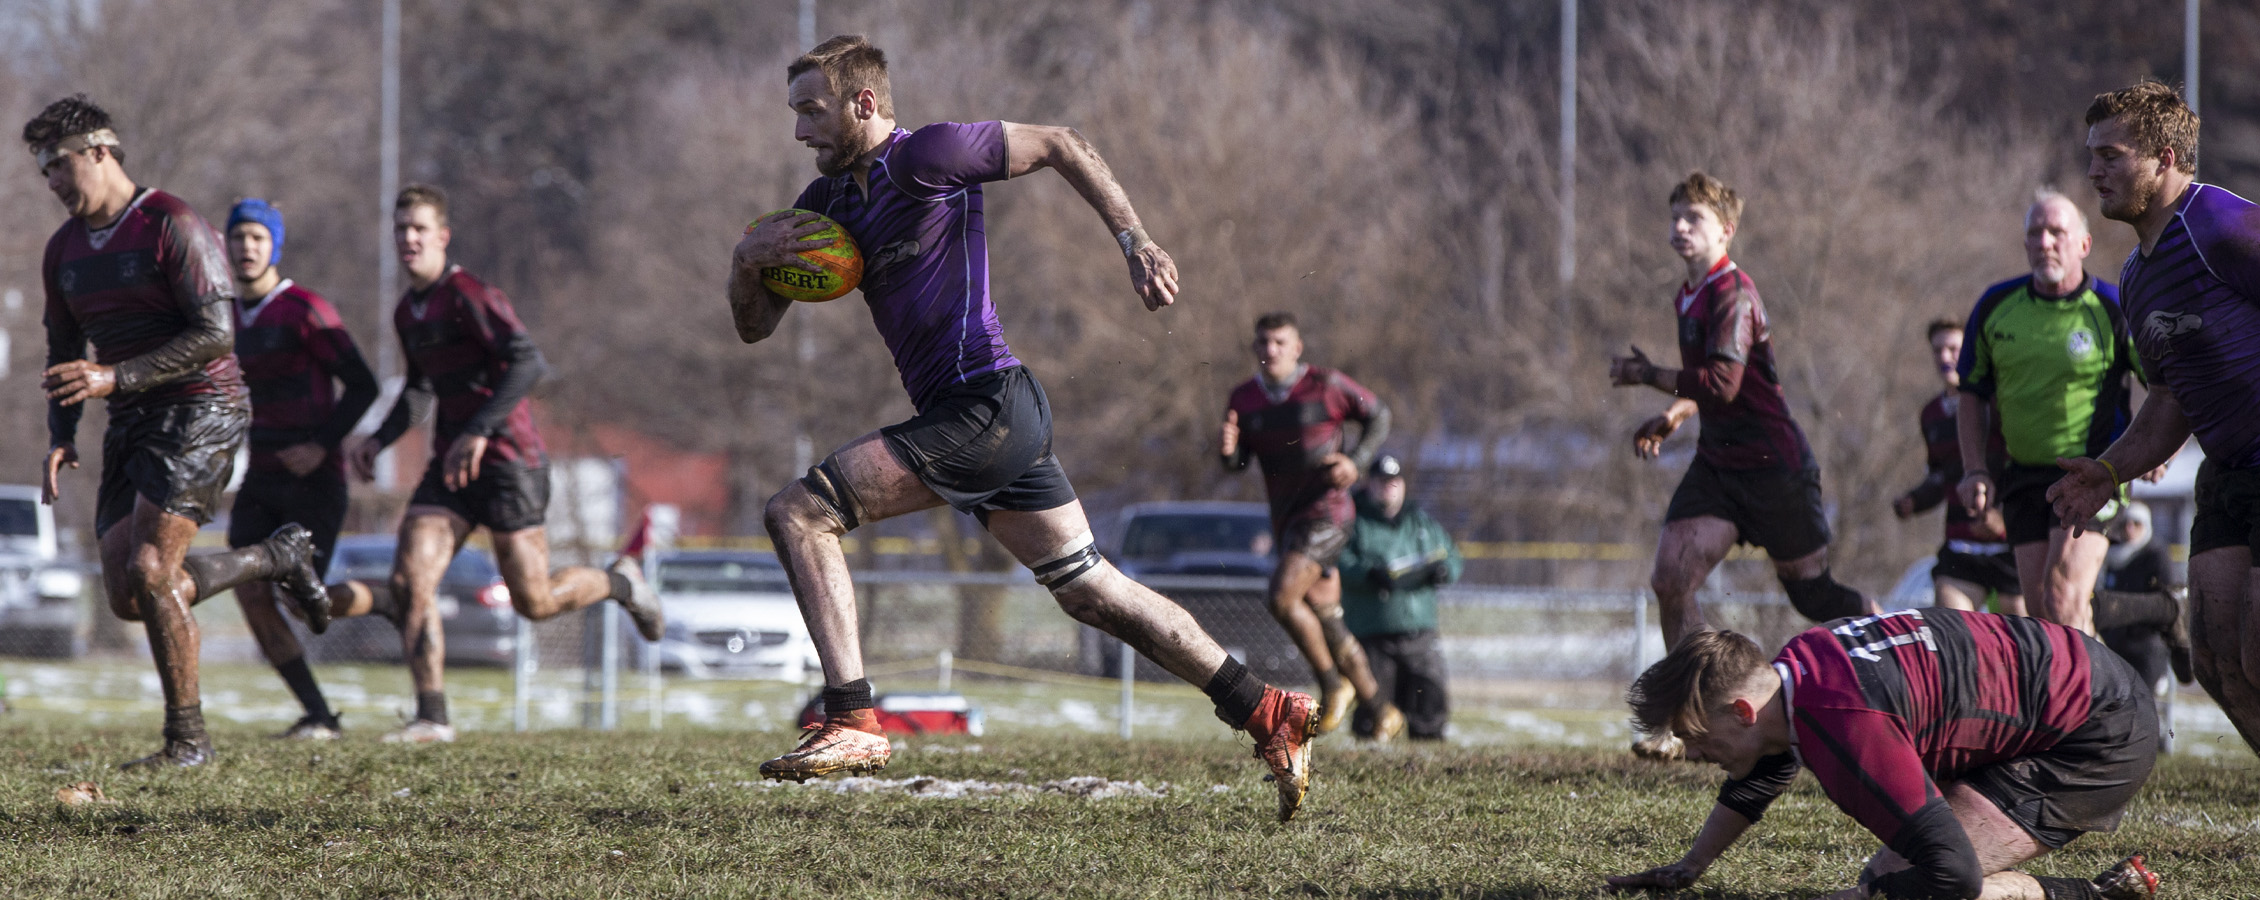 A Warhawk men's rugby player runs with the ball.